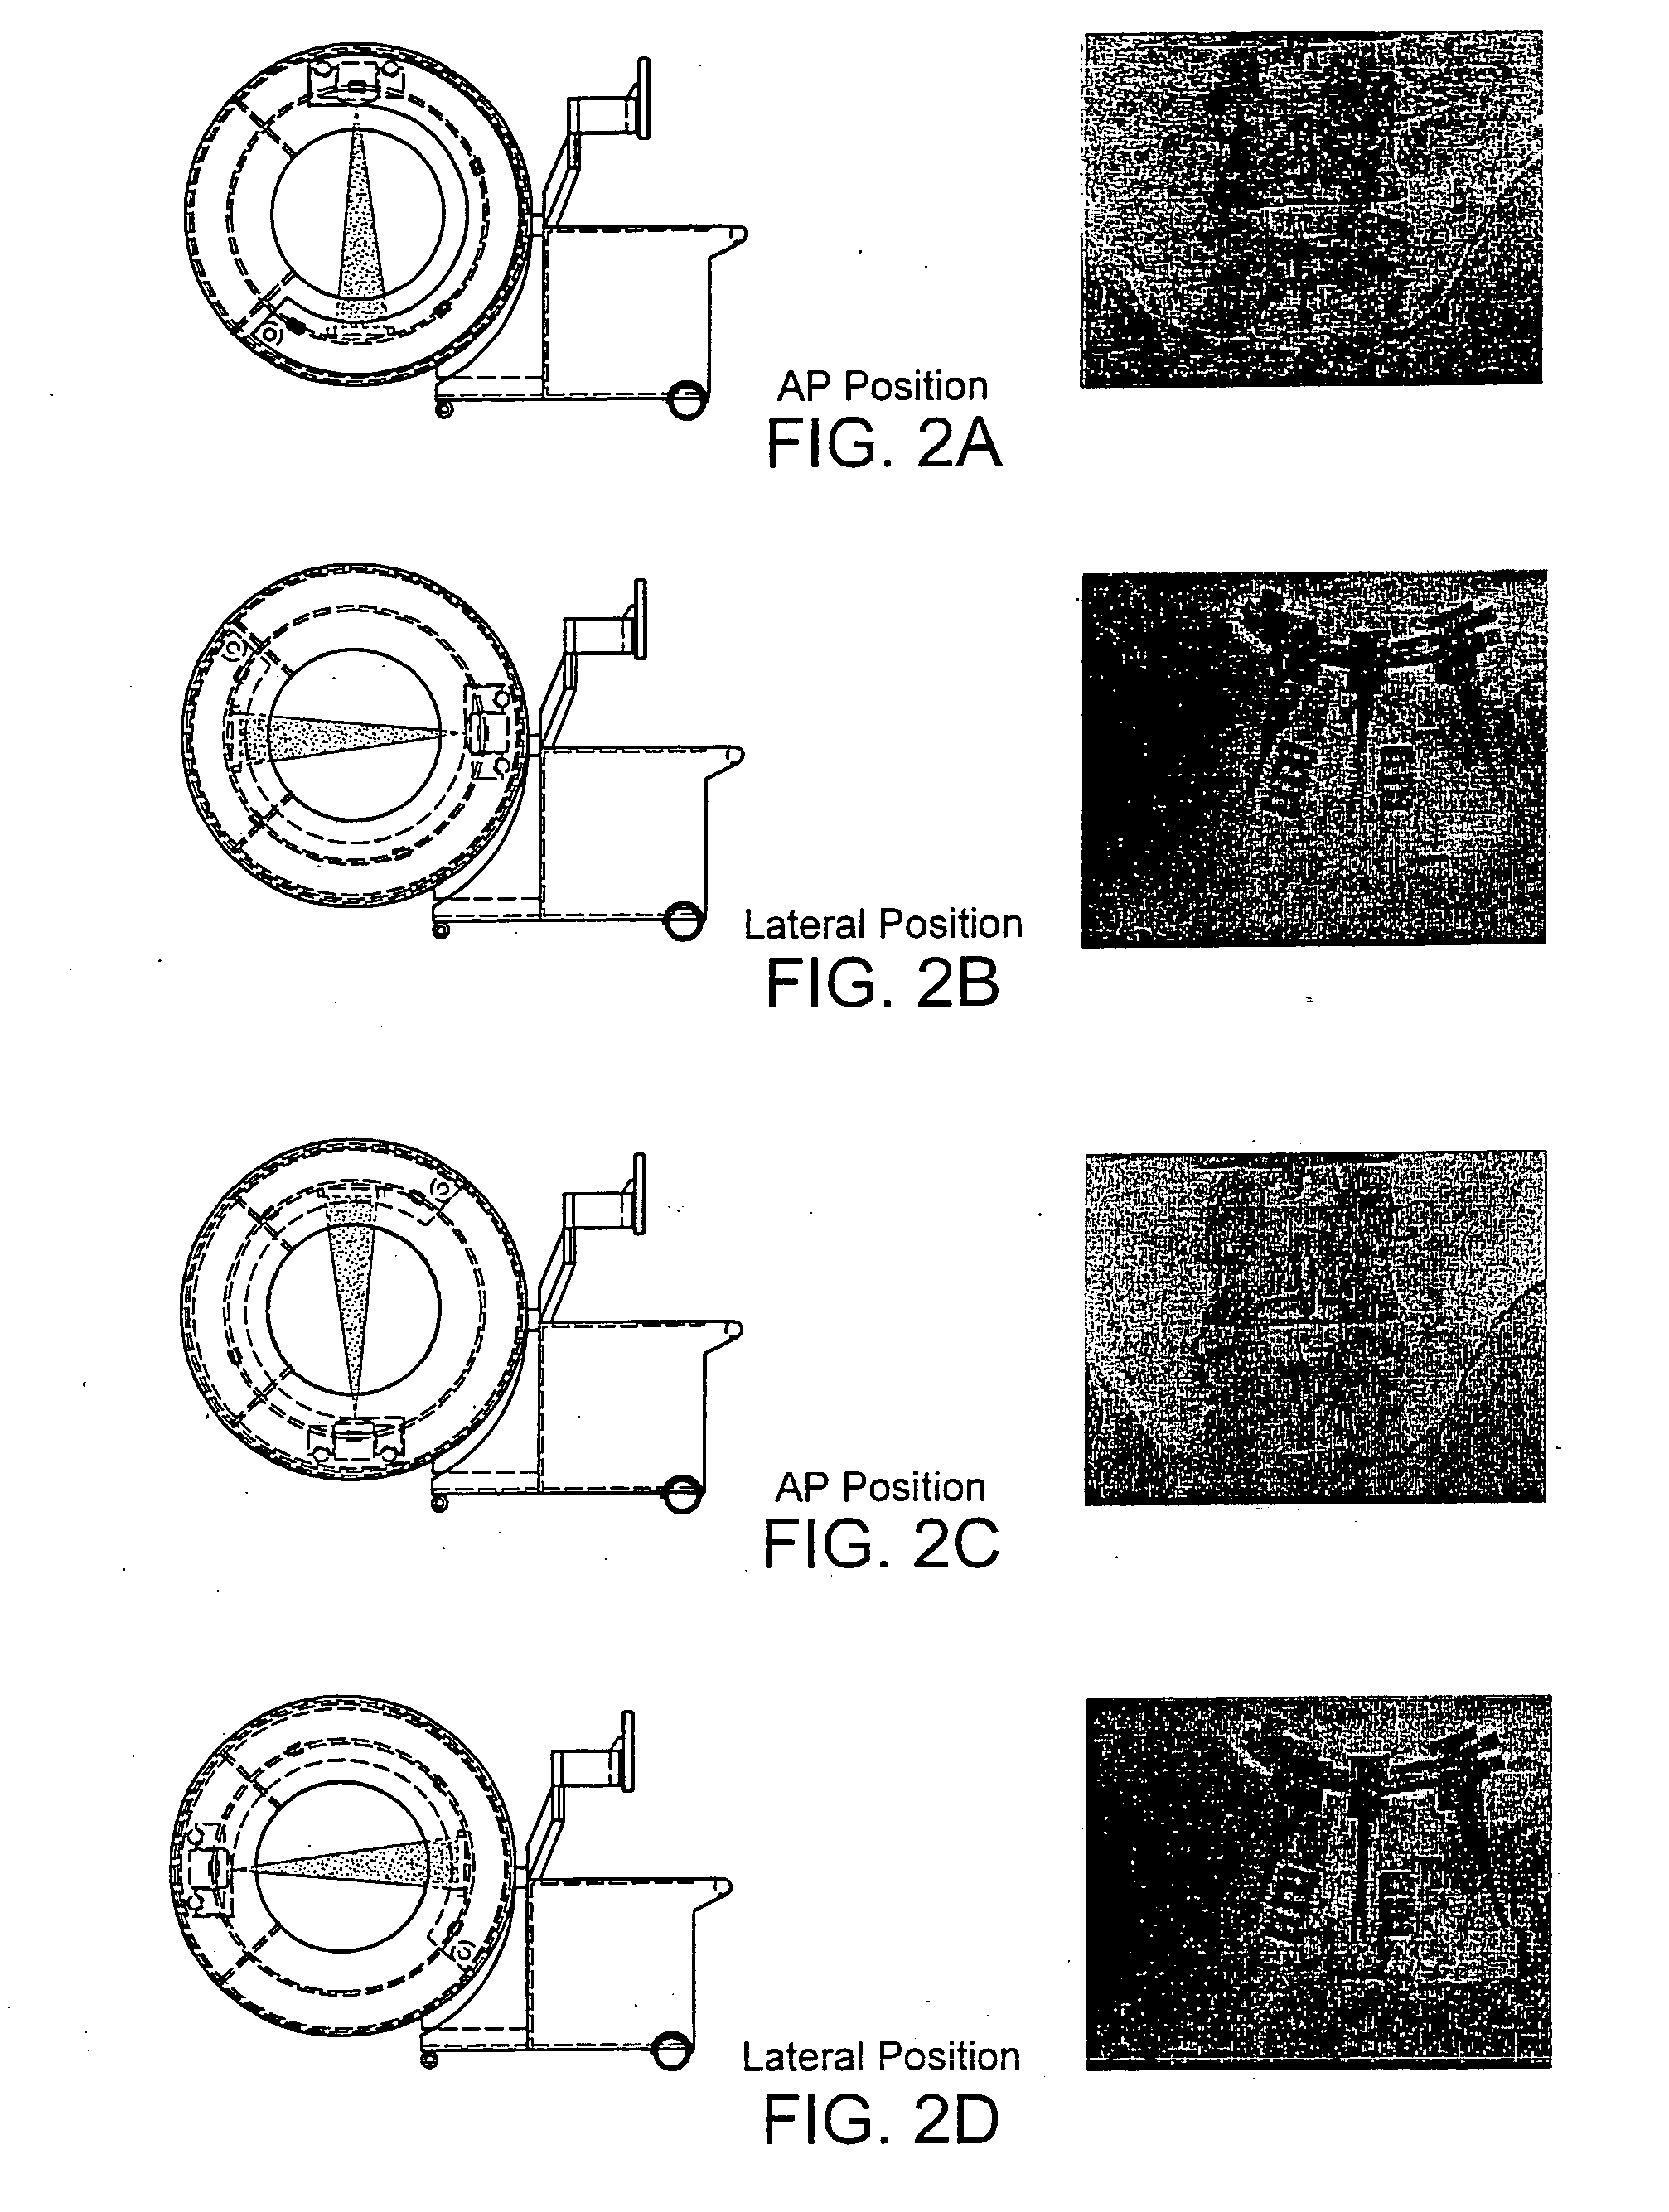 Systems and methods for quasi-simultaneous multi-planar x-ray imaging